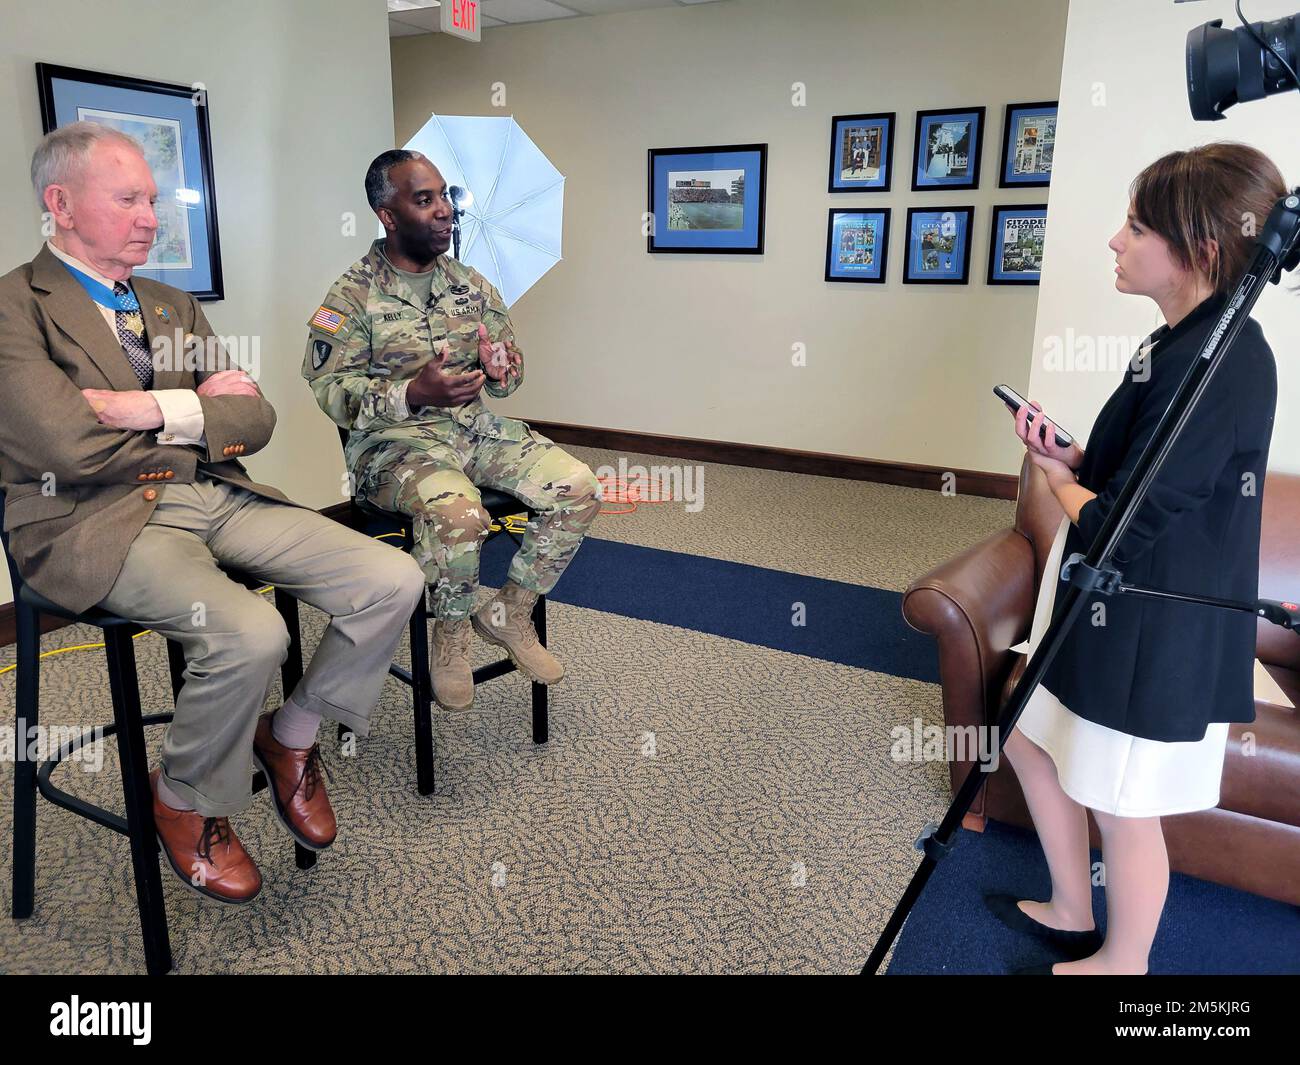 Jackie Pennoyer, a public affairs specialist with the U.S. Army Corps Of Engineers Charleston District, interviews U.S. Marine Corps Maj. Gen. (retired) James Livingston (left) and U.S. Army Brig. Gen. Jason Kelly, commander of the U.S. Army Corps Of Engineers South Atlantic Division.  Livingston, a Medal Of Honor recipient, was a keynote speaker during the division's recent military Leadership Development Program.  Charleston District hosted the event. Stock Photo